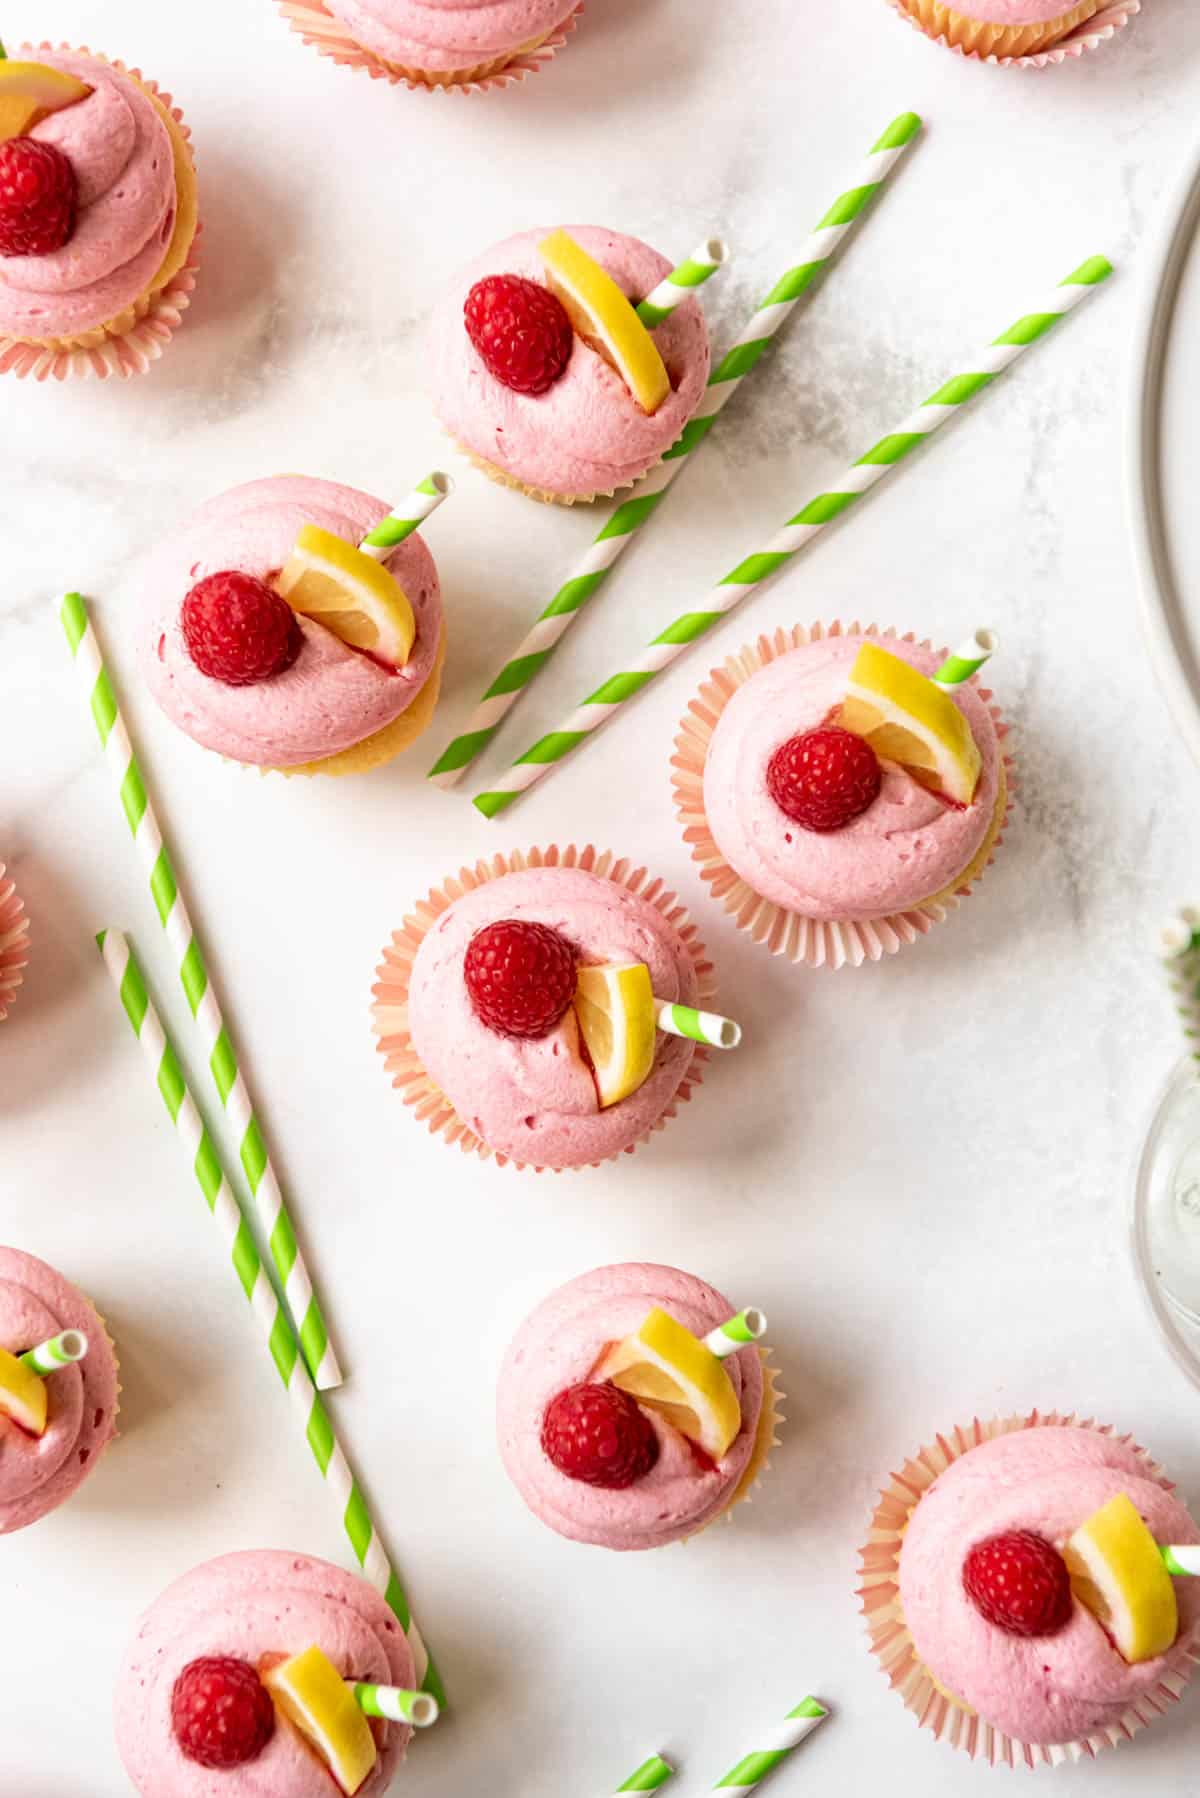 Top view of Raspberry lemonade cupcakes decorated with fresh raspberries, lemon slices, and straws.